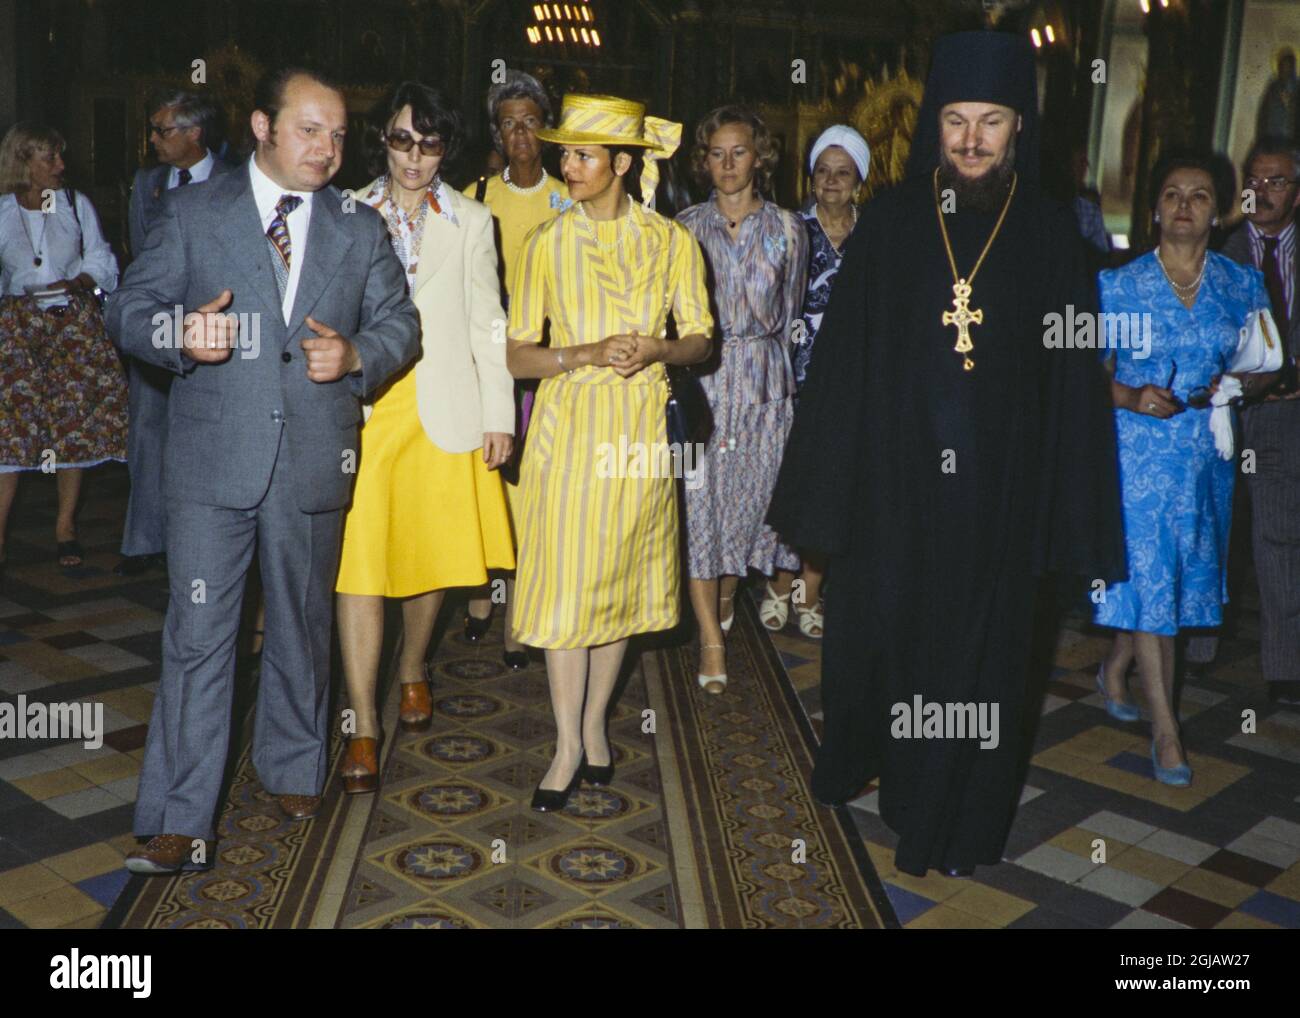 MOSCOW 1978 JUNE Sweden's Queen Silvia visits Zagorsk outside Moscow where she met Archbishop Vladimir in connection with the Swedish Royals official visit to Moscow, the Soviet Union in June 1978. Photo: Hans T Dahlskog / TT / Code: 1003  Stock Photo